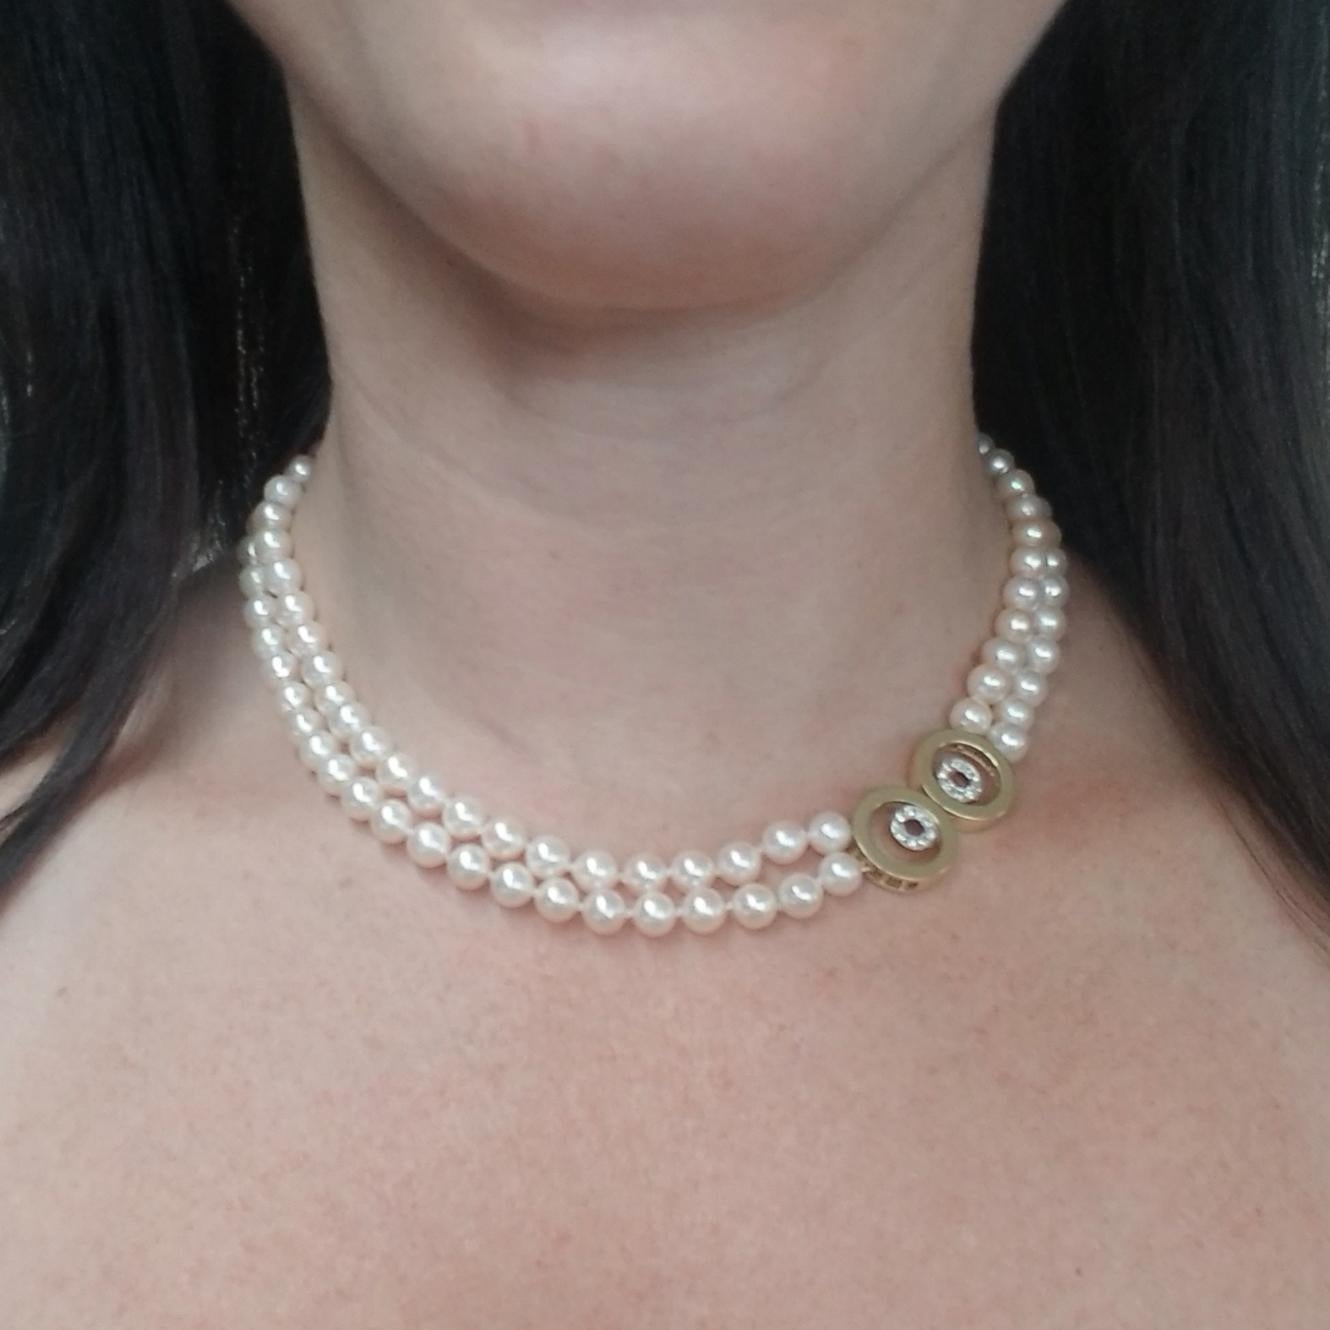 14 Karat Yellow Gold Double Pearl Strand Collar Necklace Featuring 107 Round Cultured Pearls Measuring 6mm-6.5mm. Decorative Hidden Clasp Contains 18 Round Diamonds Totaling Approximately 0.18 Carats of VS Clarity & G Color. 16 Inches Long. Recently